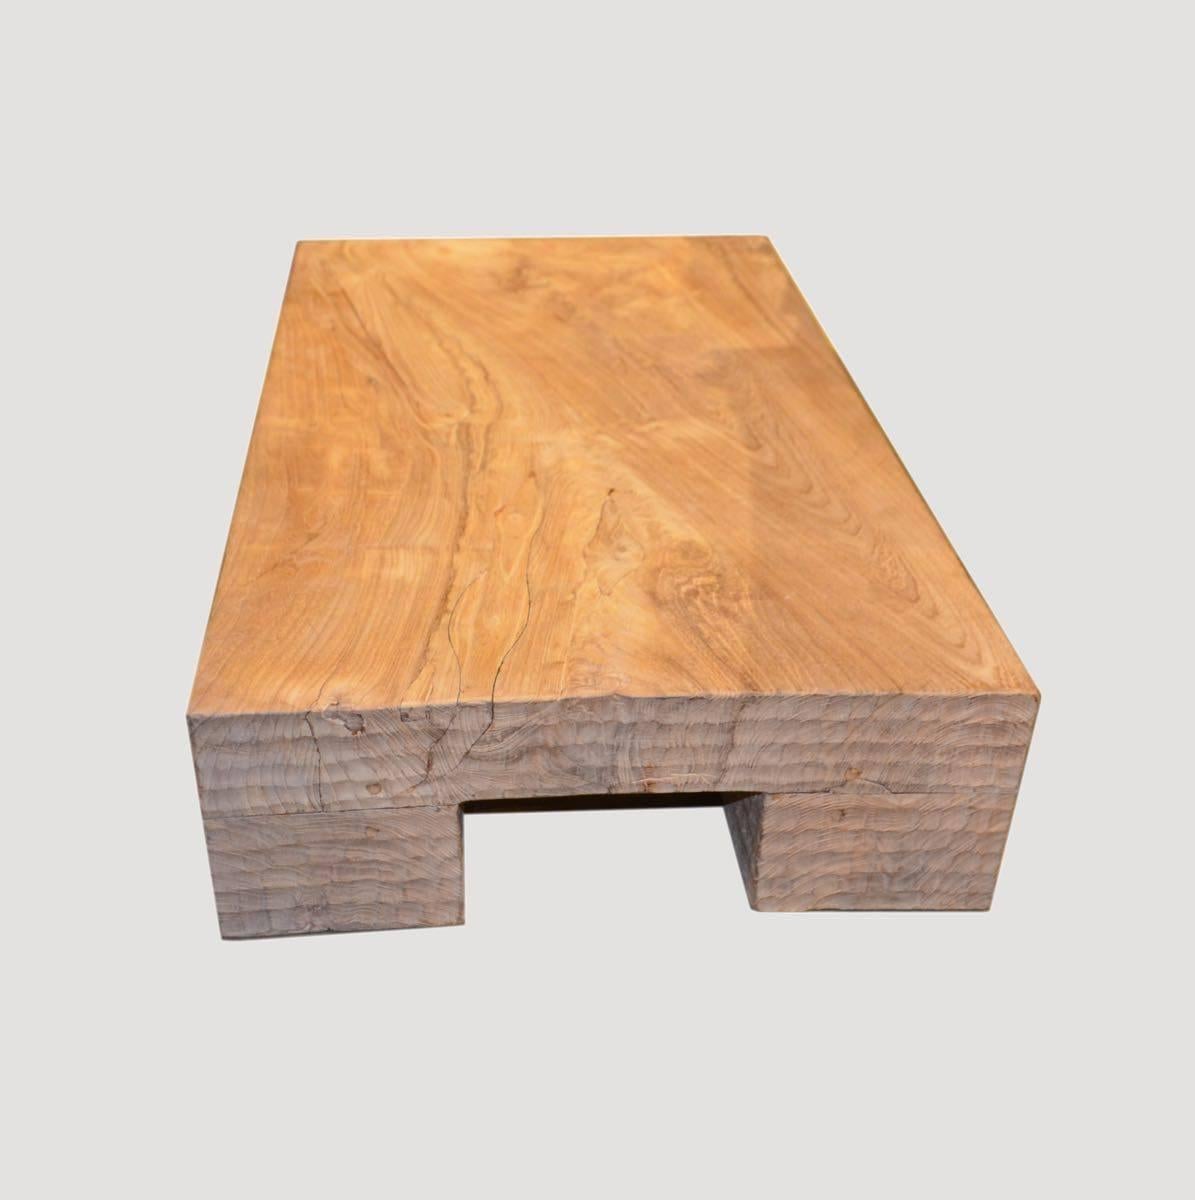 Minimalist single reclaimed teak slab low coffee table. Carved block legs. Custom stains available.

This coffee table was sourced in the spirit of wabi-sabi, a Japanese philosophy that beauty can be found in imperfection and impermanence. It’s a